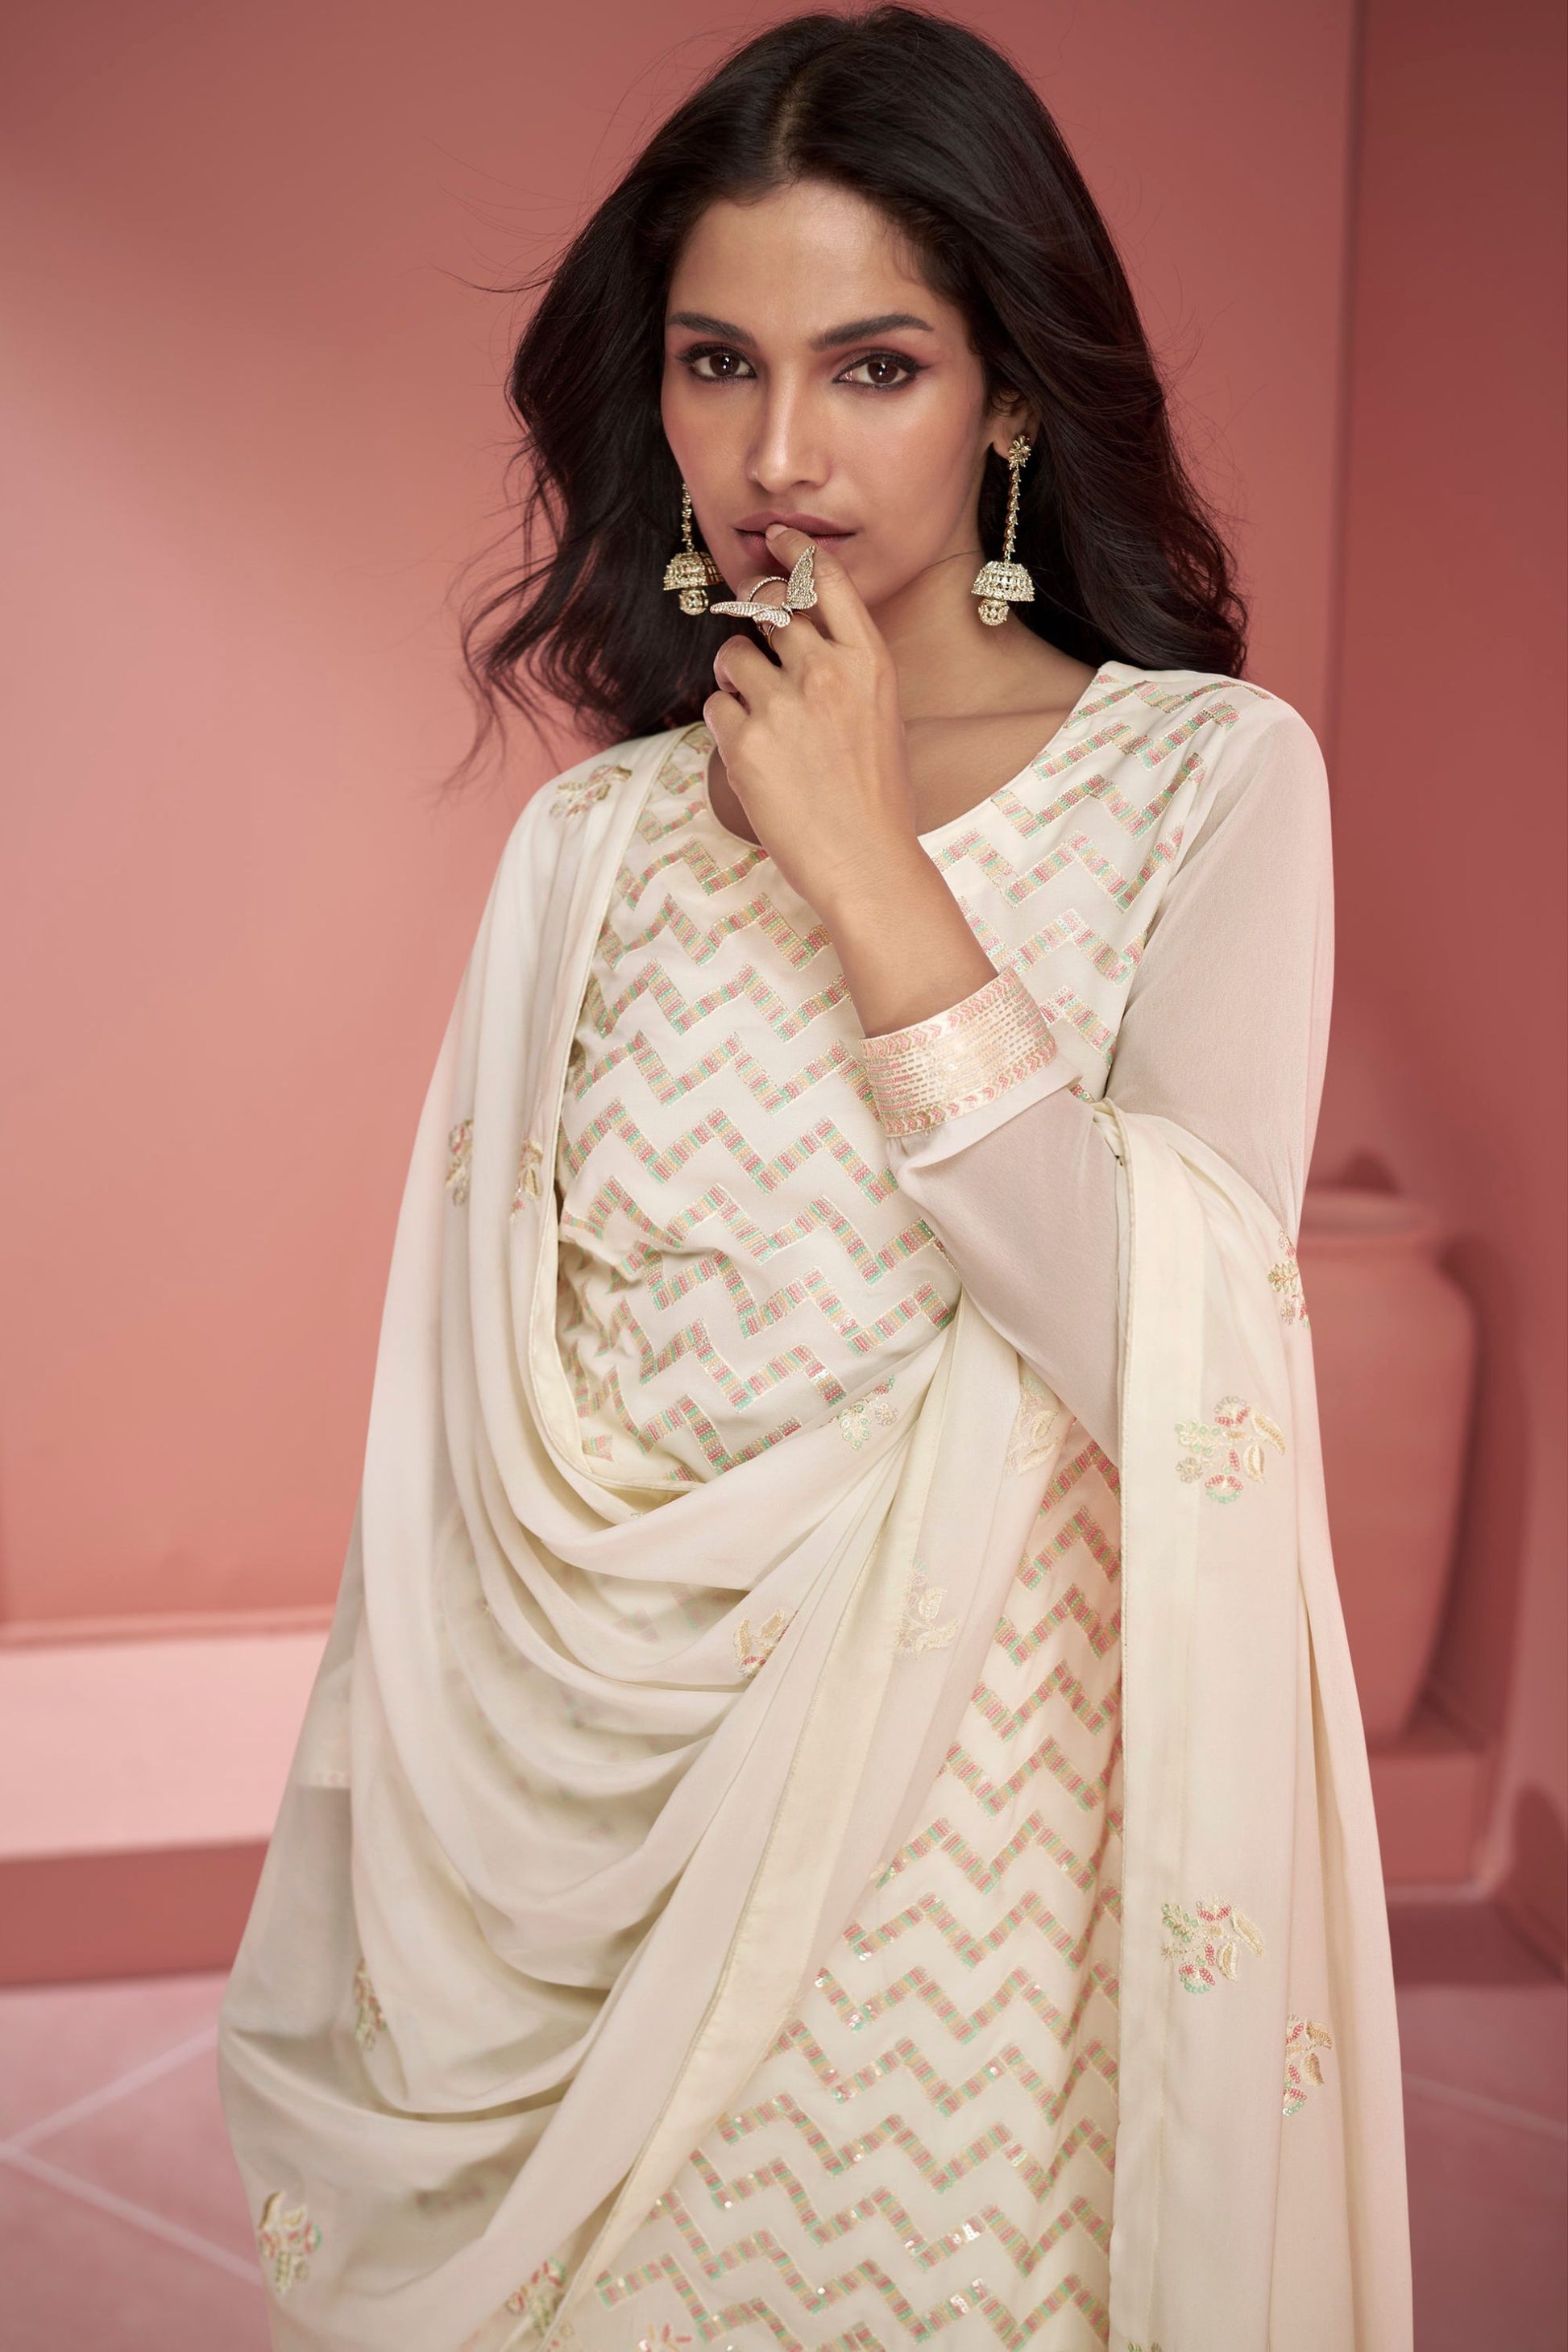 Cream Georgette Plazo Suit For Indian Festivals & Weddings - Thread Embroidery Work